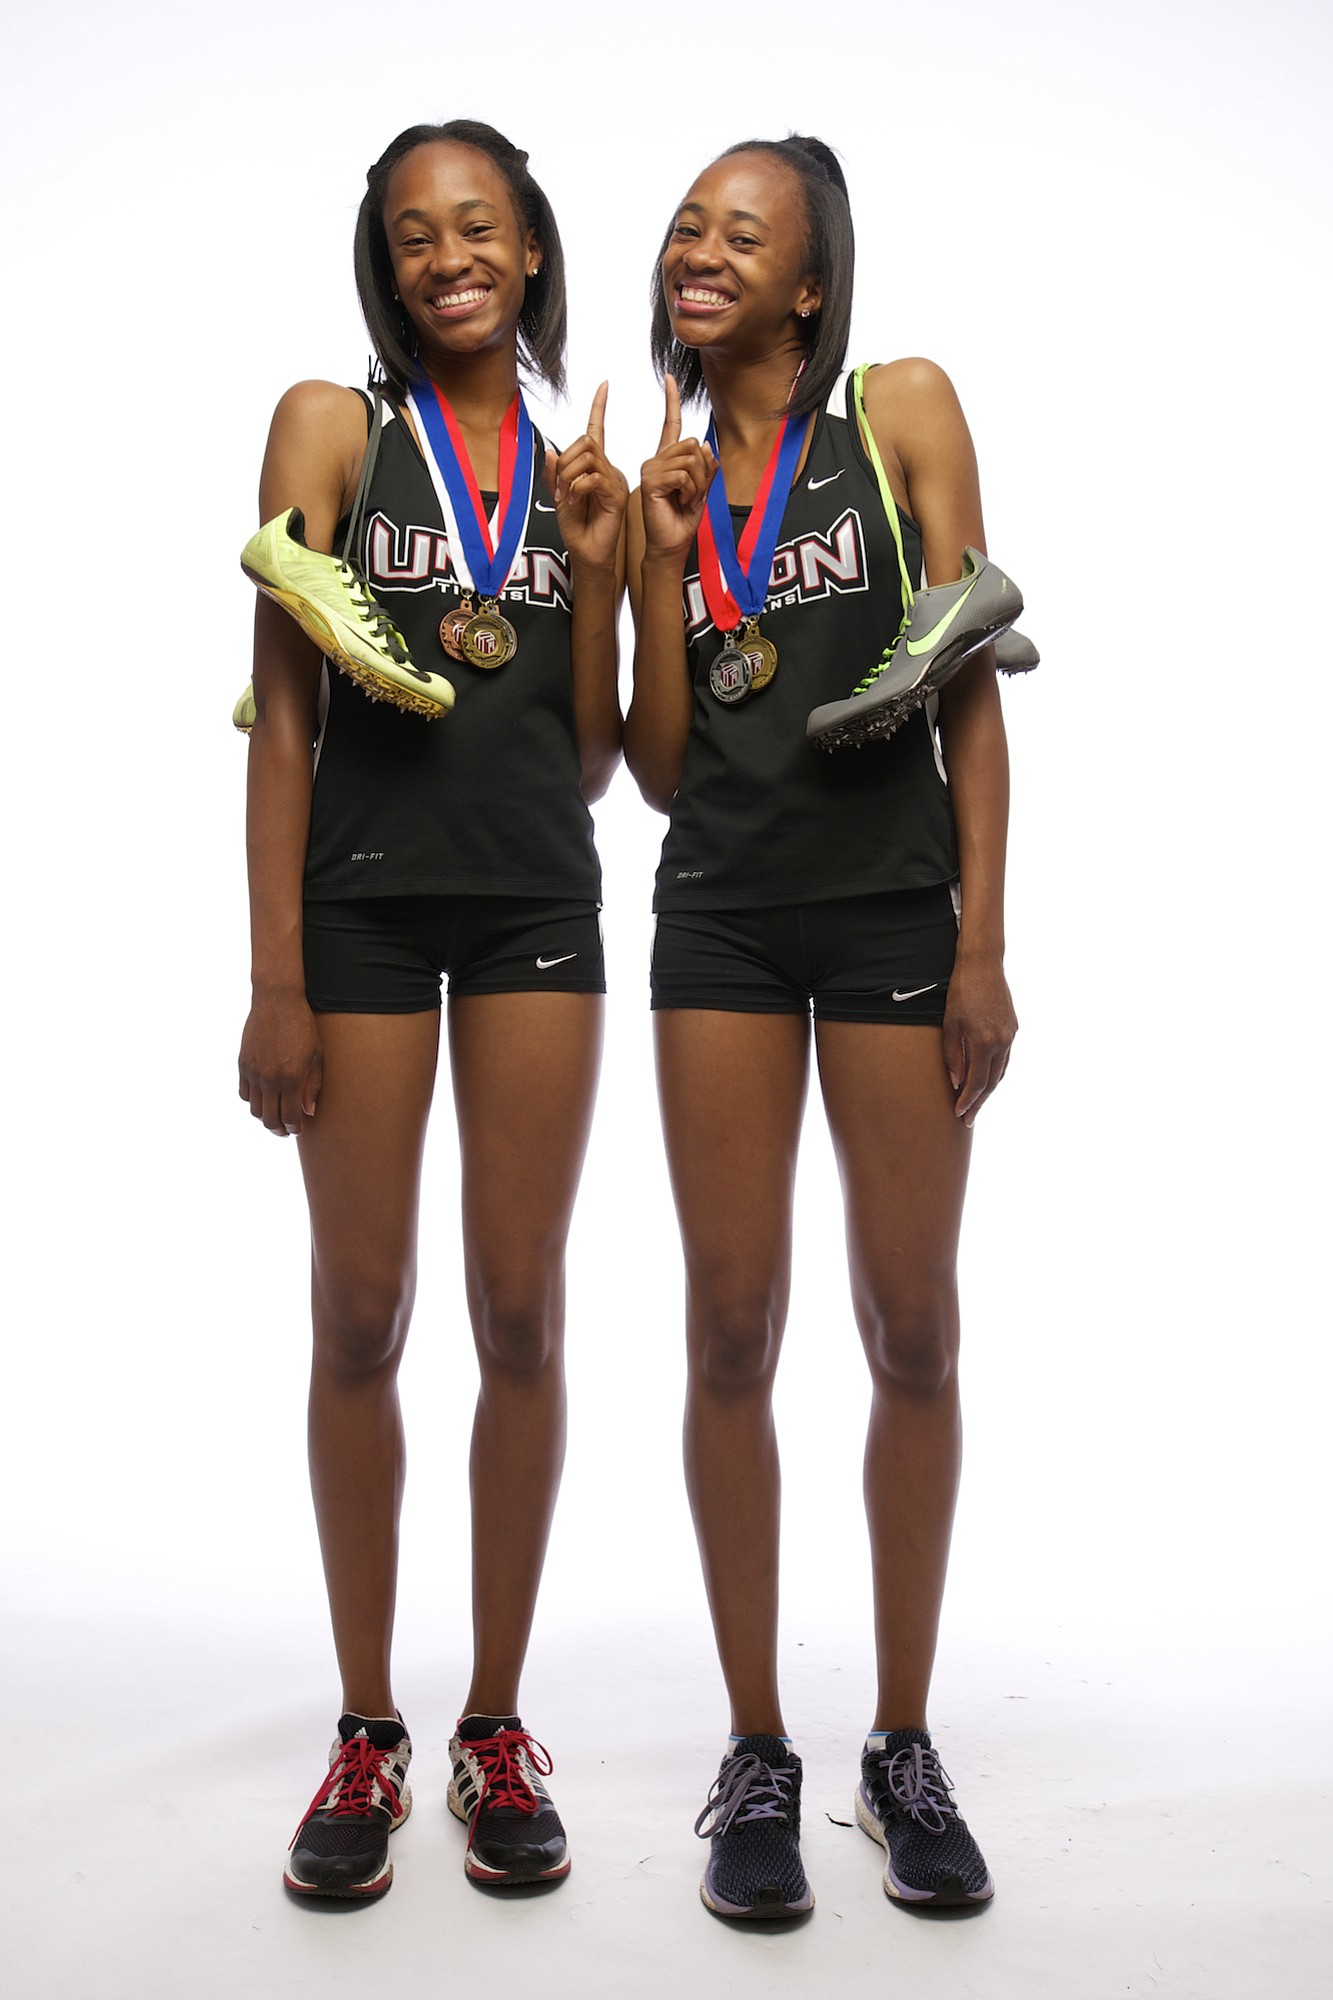 All-Region girls track athletes of the year, Jai'lyn, left, and Dai'lyn Merriweather of Union, shown, Wednesday, June 10, 2015.